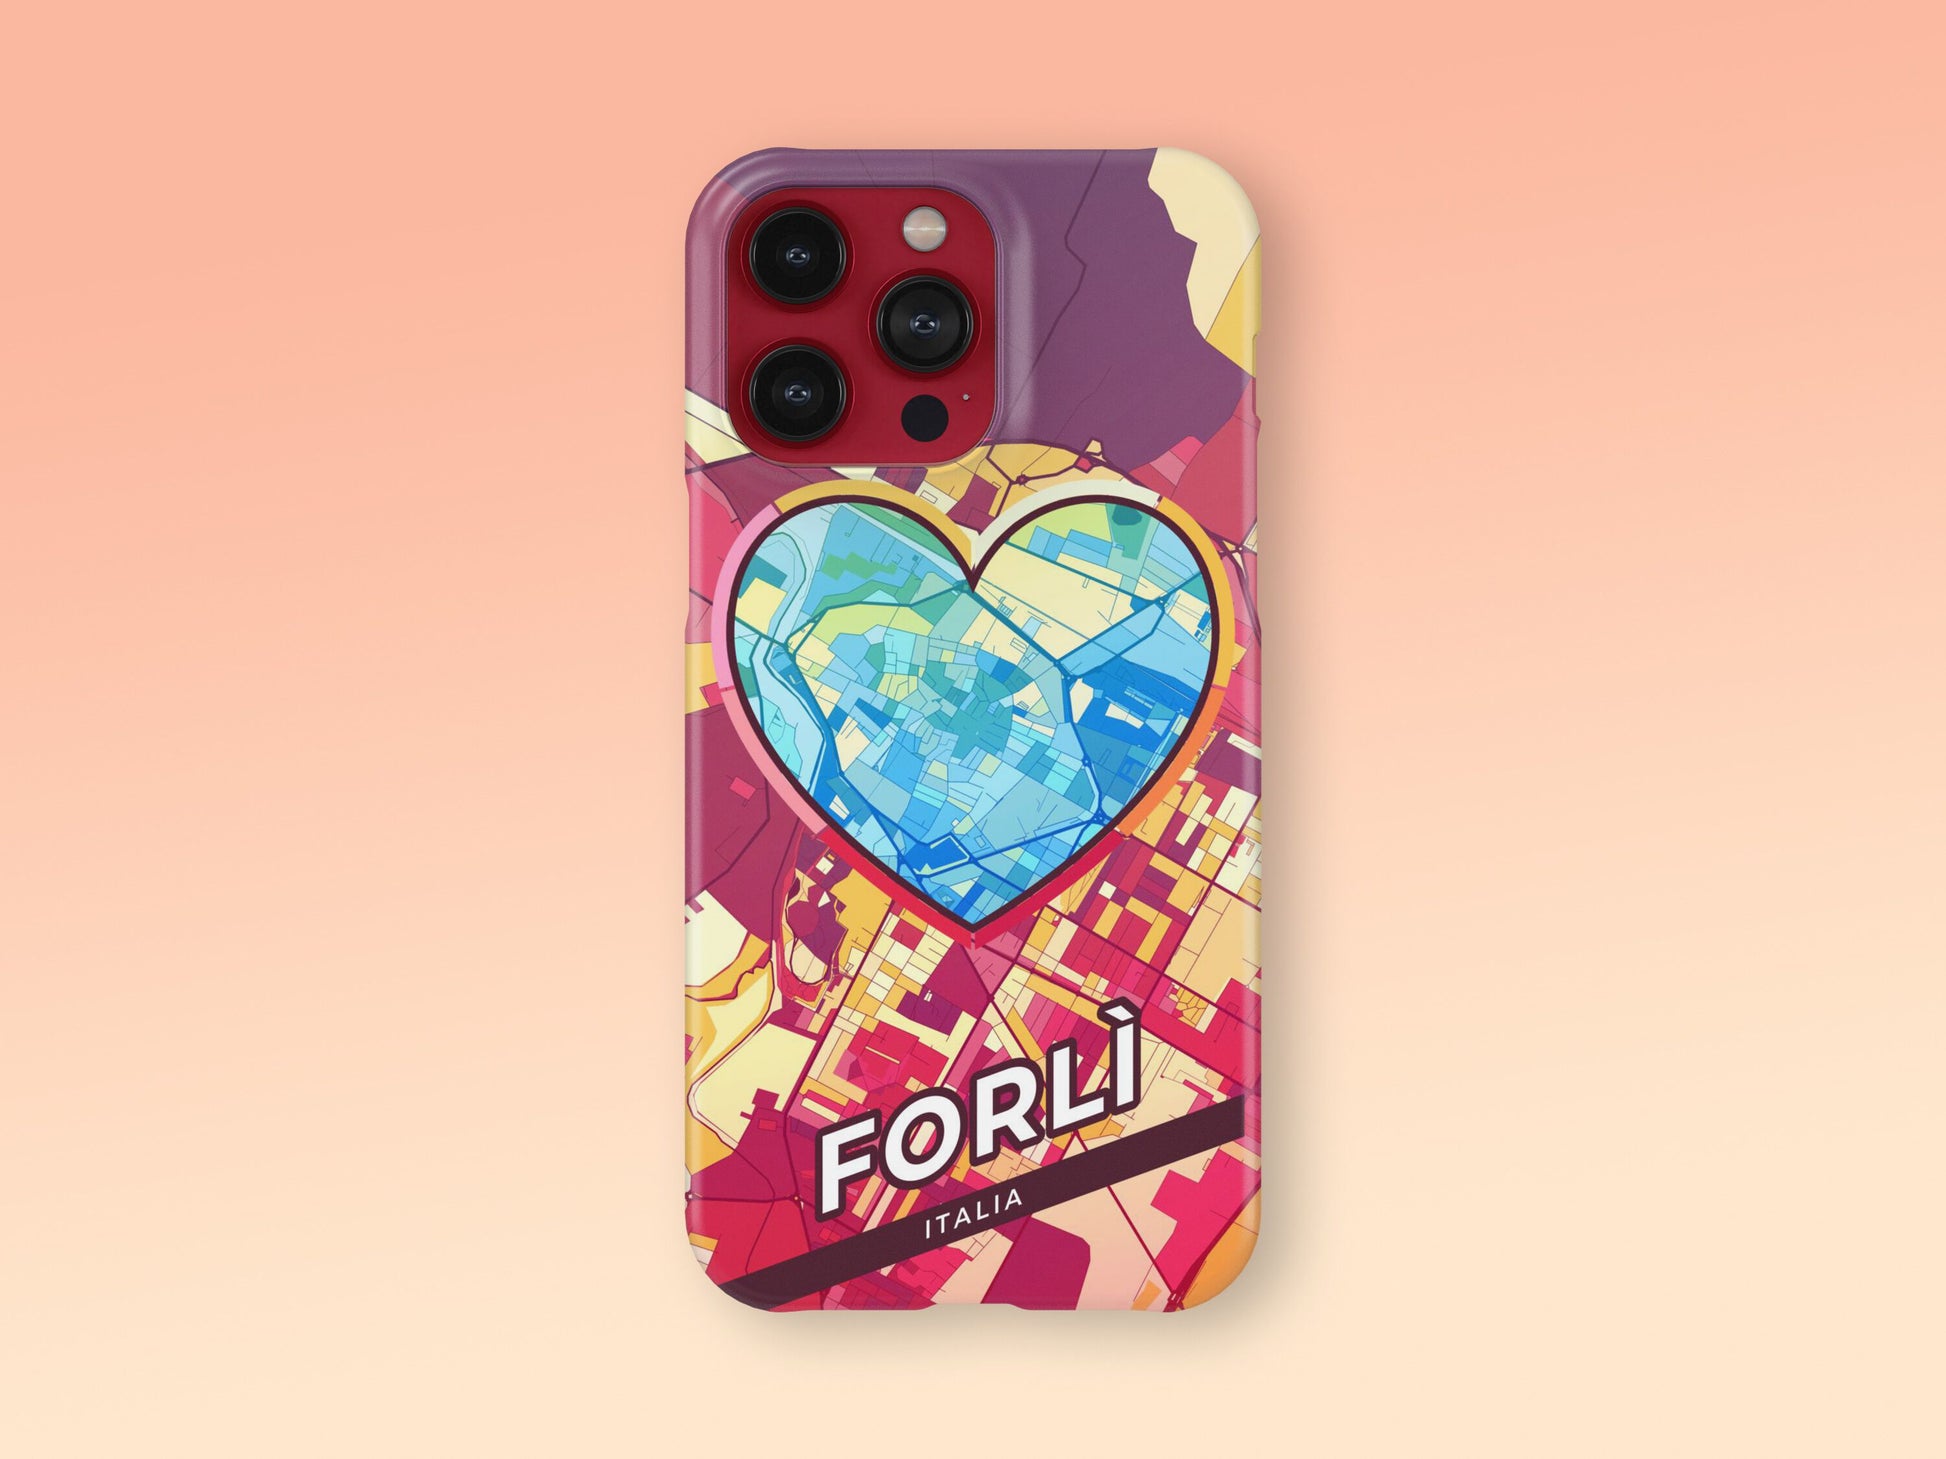 Forlì Italy slim phone case with colorful icon. Birthday, wedding or housewarming gift. Couple match cases. 2